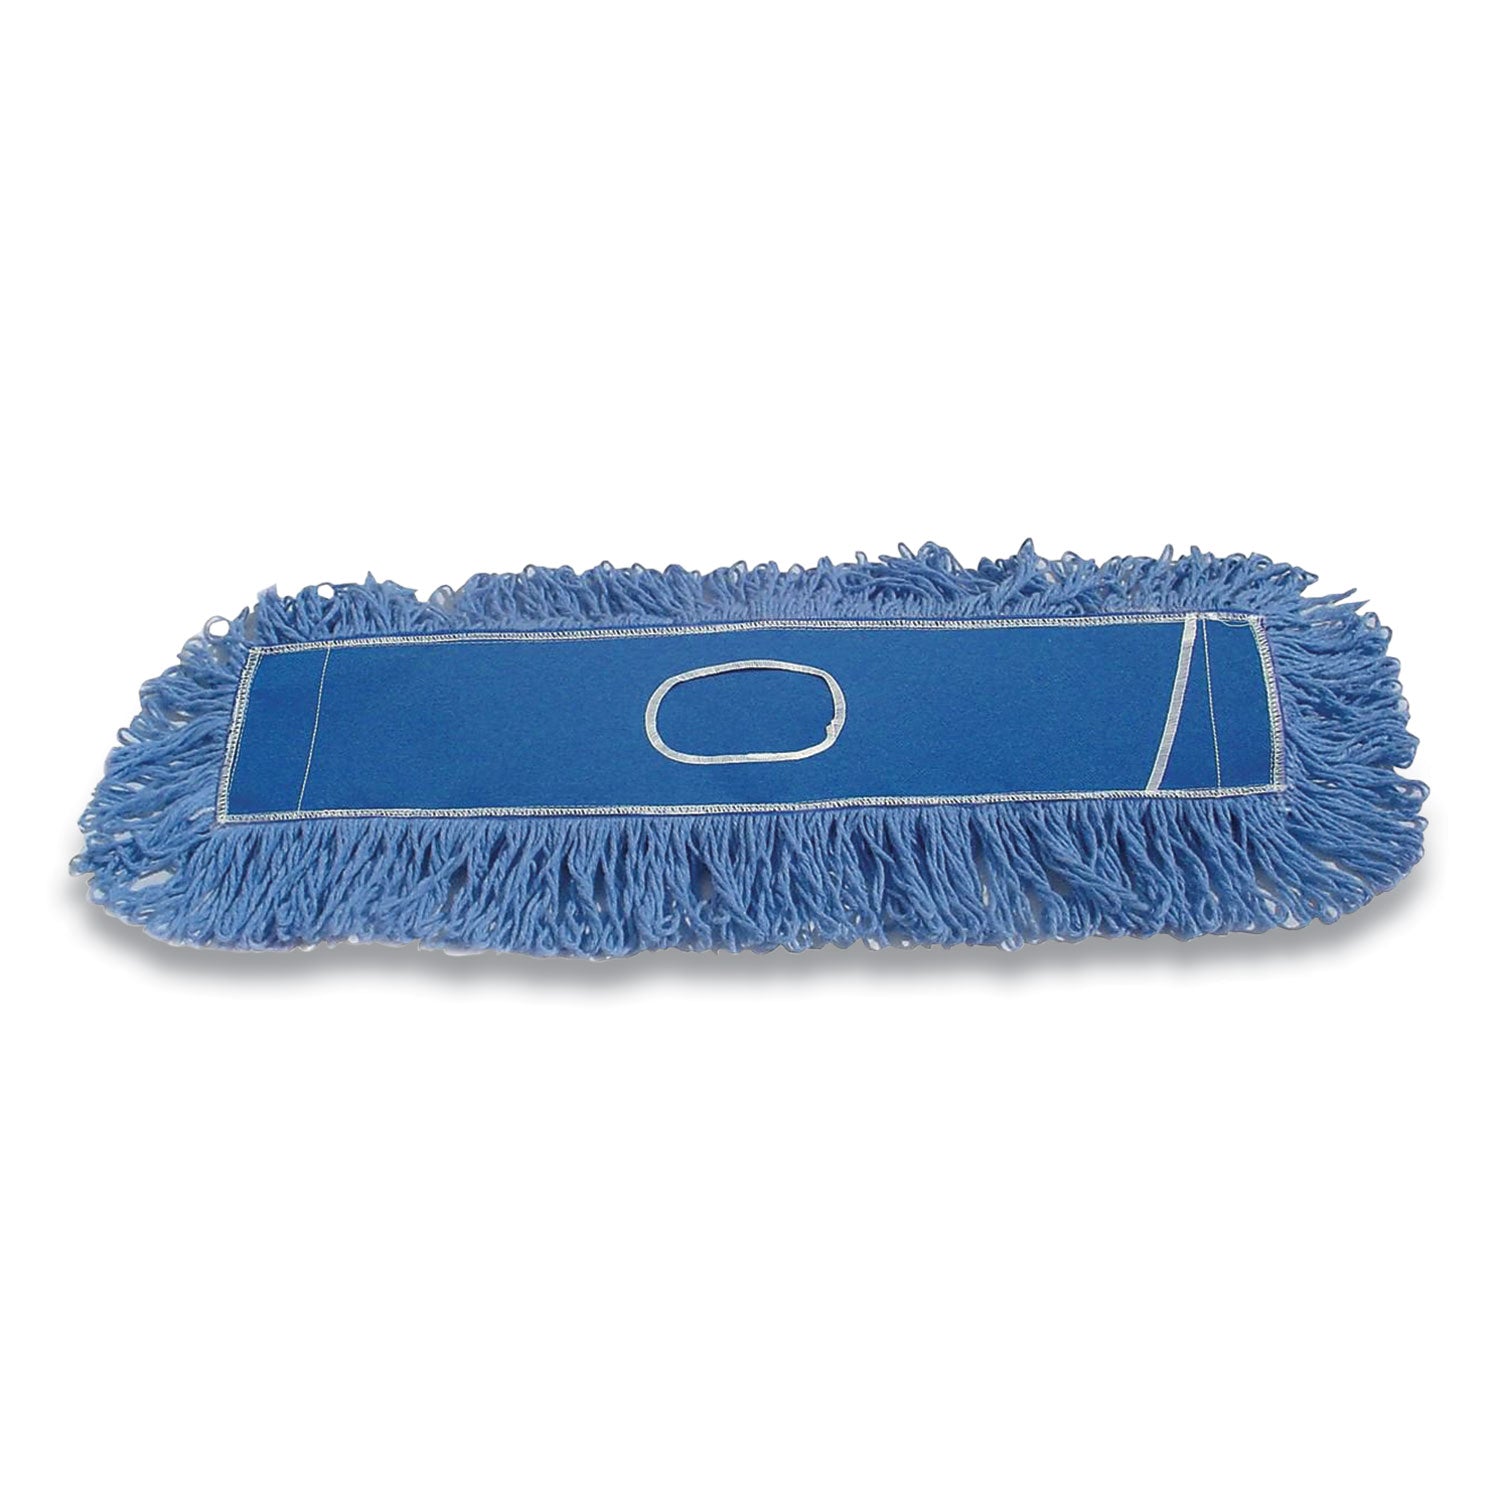 twisted-loop-blend-dust-mop-pic-pet-polyester-24-x-5-blue_rcp25300bl00 - 2